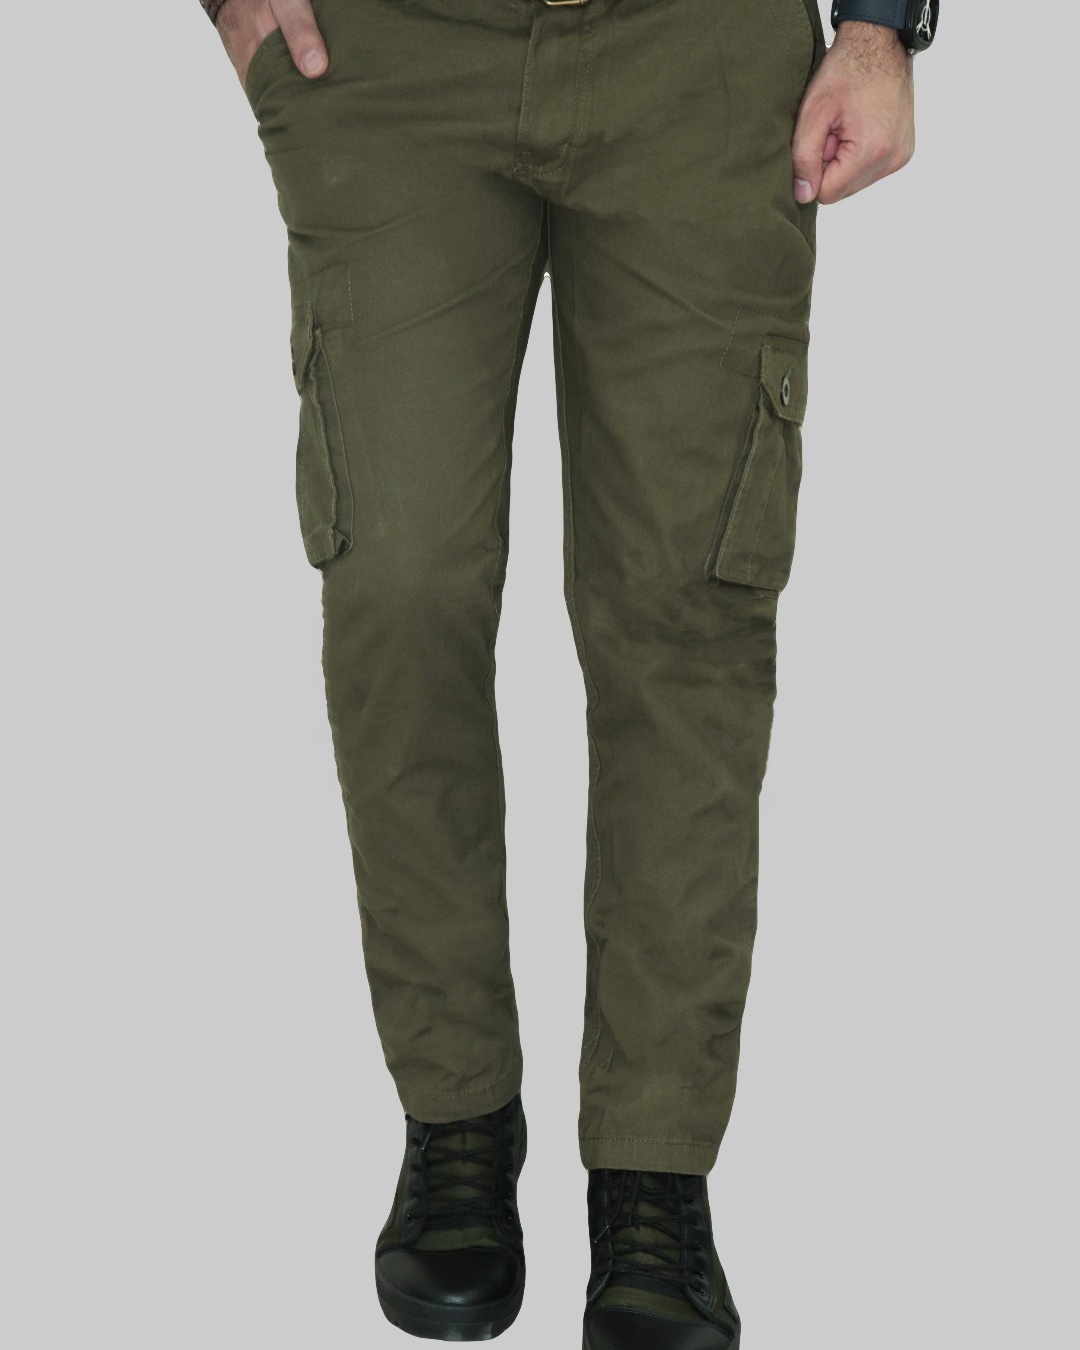 Buy Krystle Boy's Cotton Solid Olive Green Relaxed Fit Zipper DORI Slim fit  Cargo Jogger Pants (Olive Green, 30) at Amazon.in